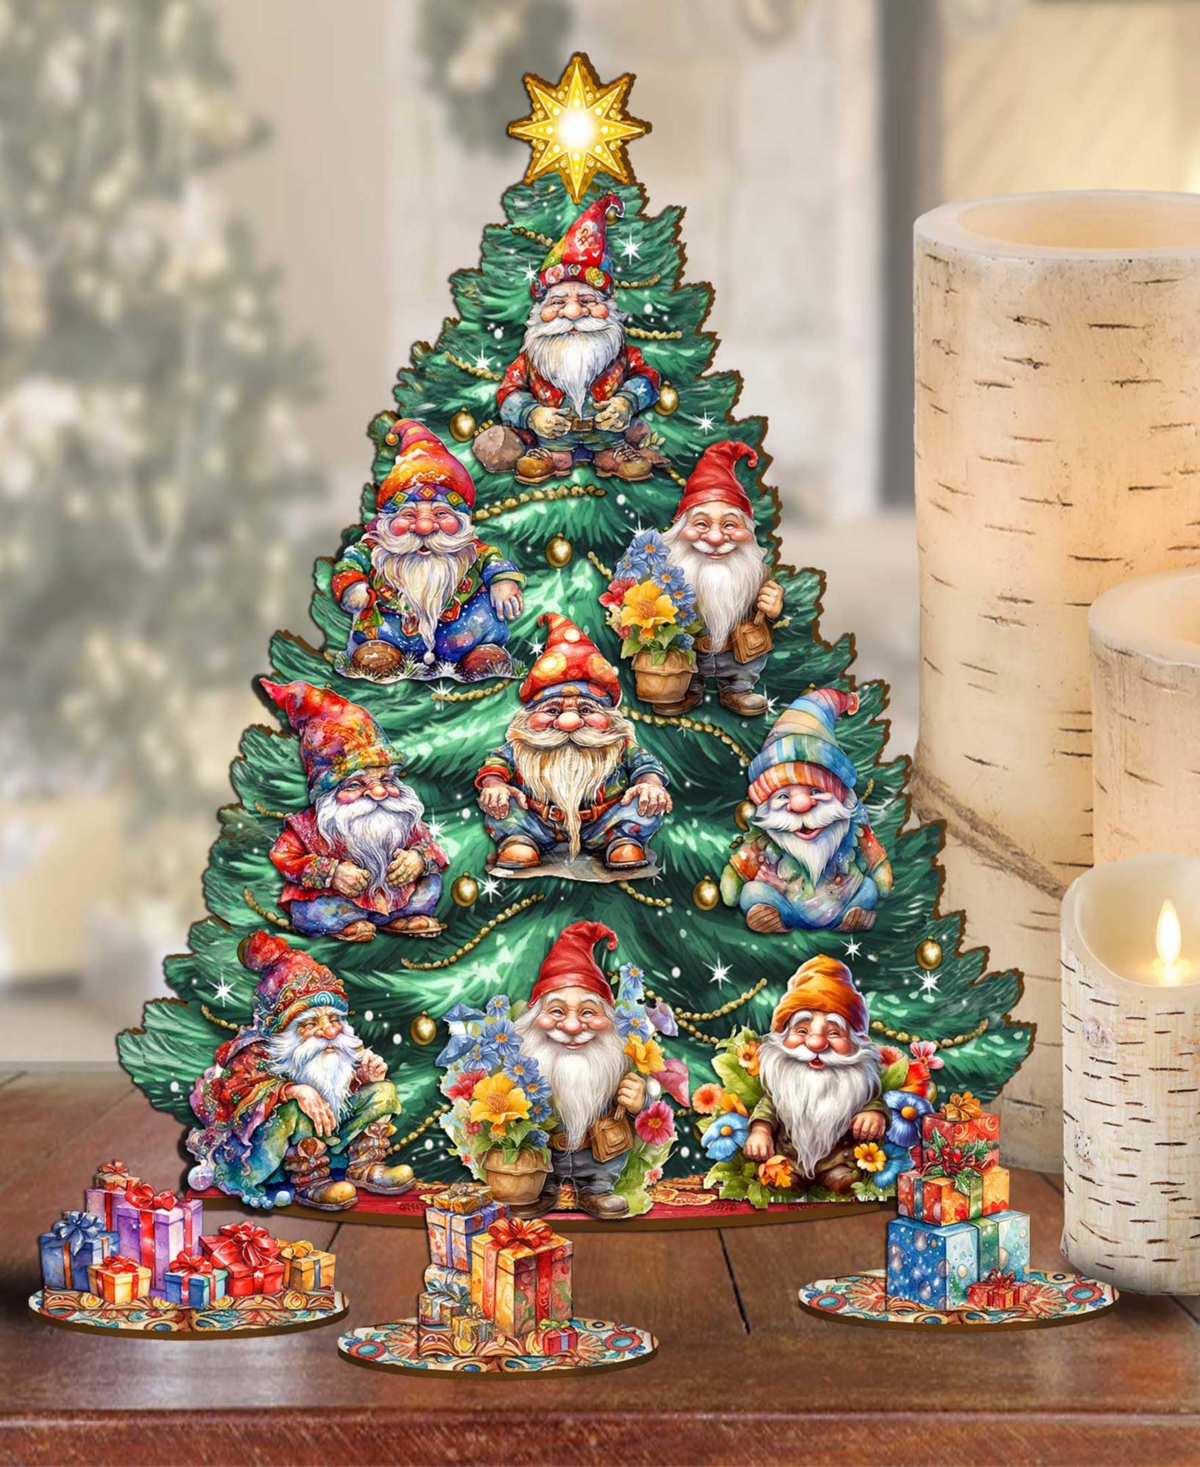 Designocracy Dwarfs And Fairies Themed Wooden Christmas Tree With Ornaments Set Of 13 G. Debrekht In Multi Color